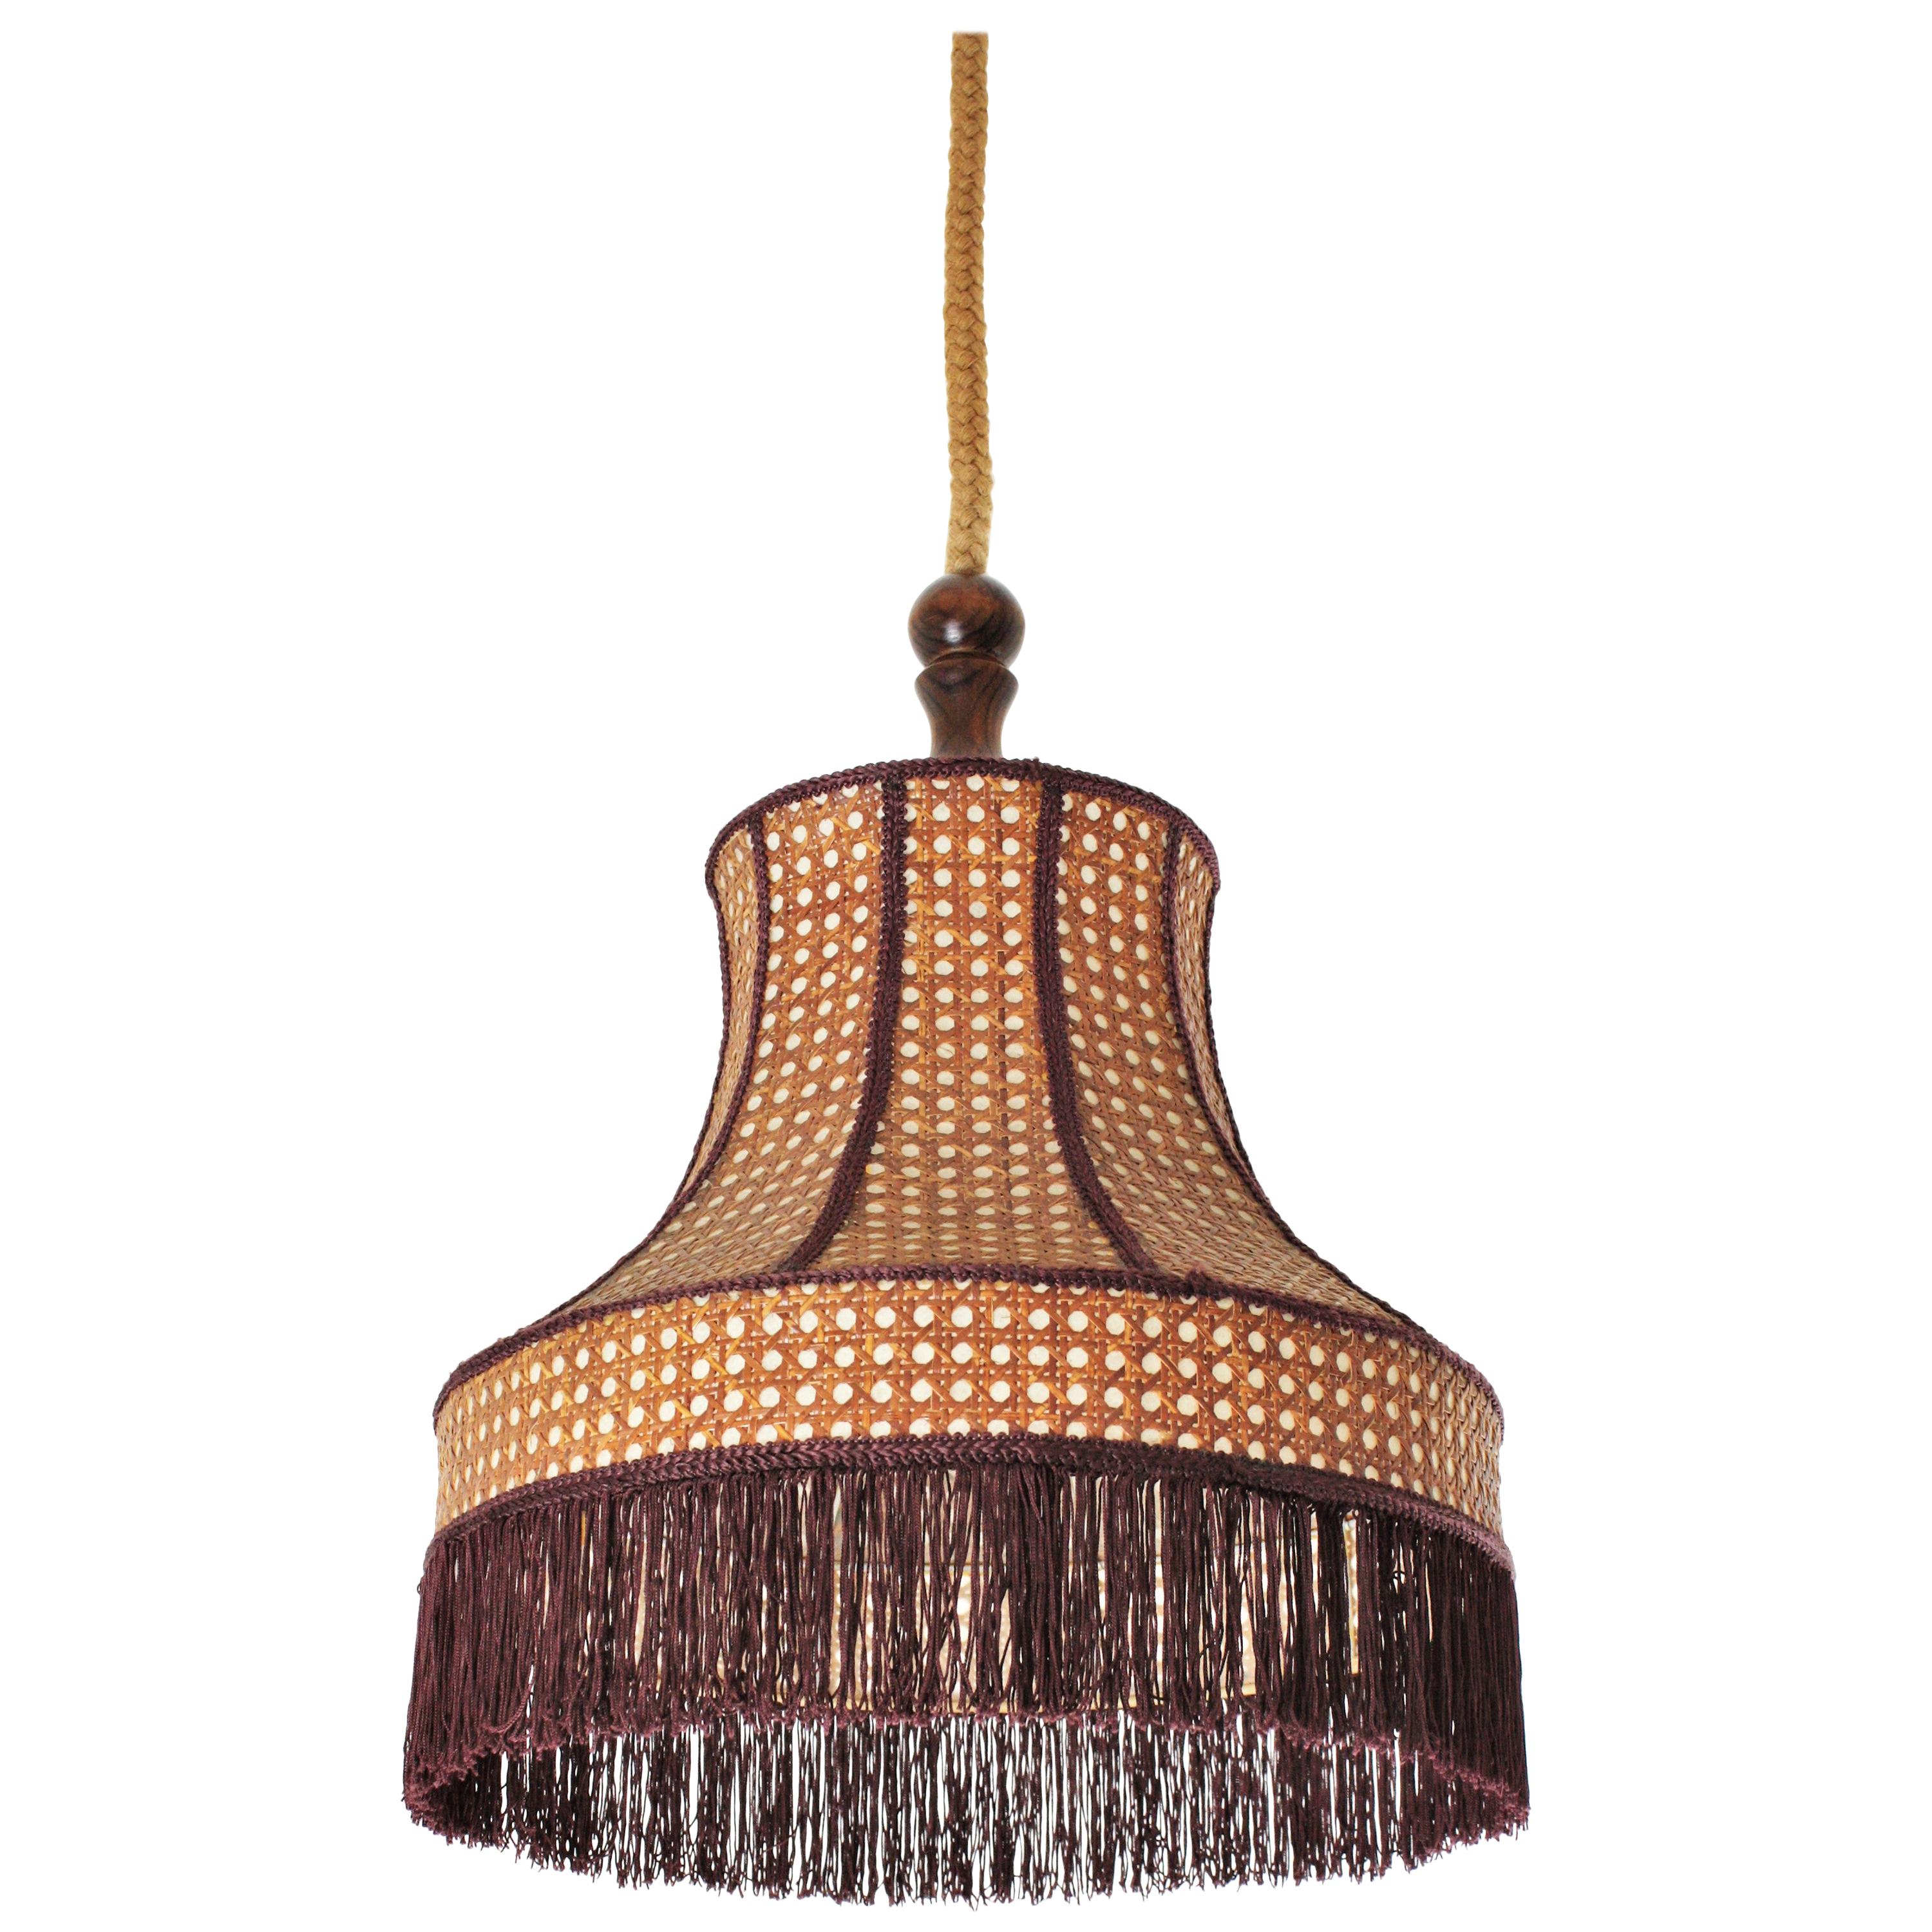 Wicker wire pagoda shaped pendant or chandelier with wood, rope and fringe details, France, 1960s.
This midcentury pendant lamp features a wicker wire pagoda fringe lampshade. It hangs from its original rope and wooden canopy.
The pagoda wicker